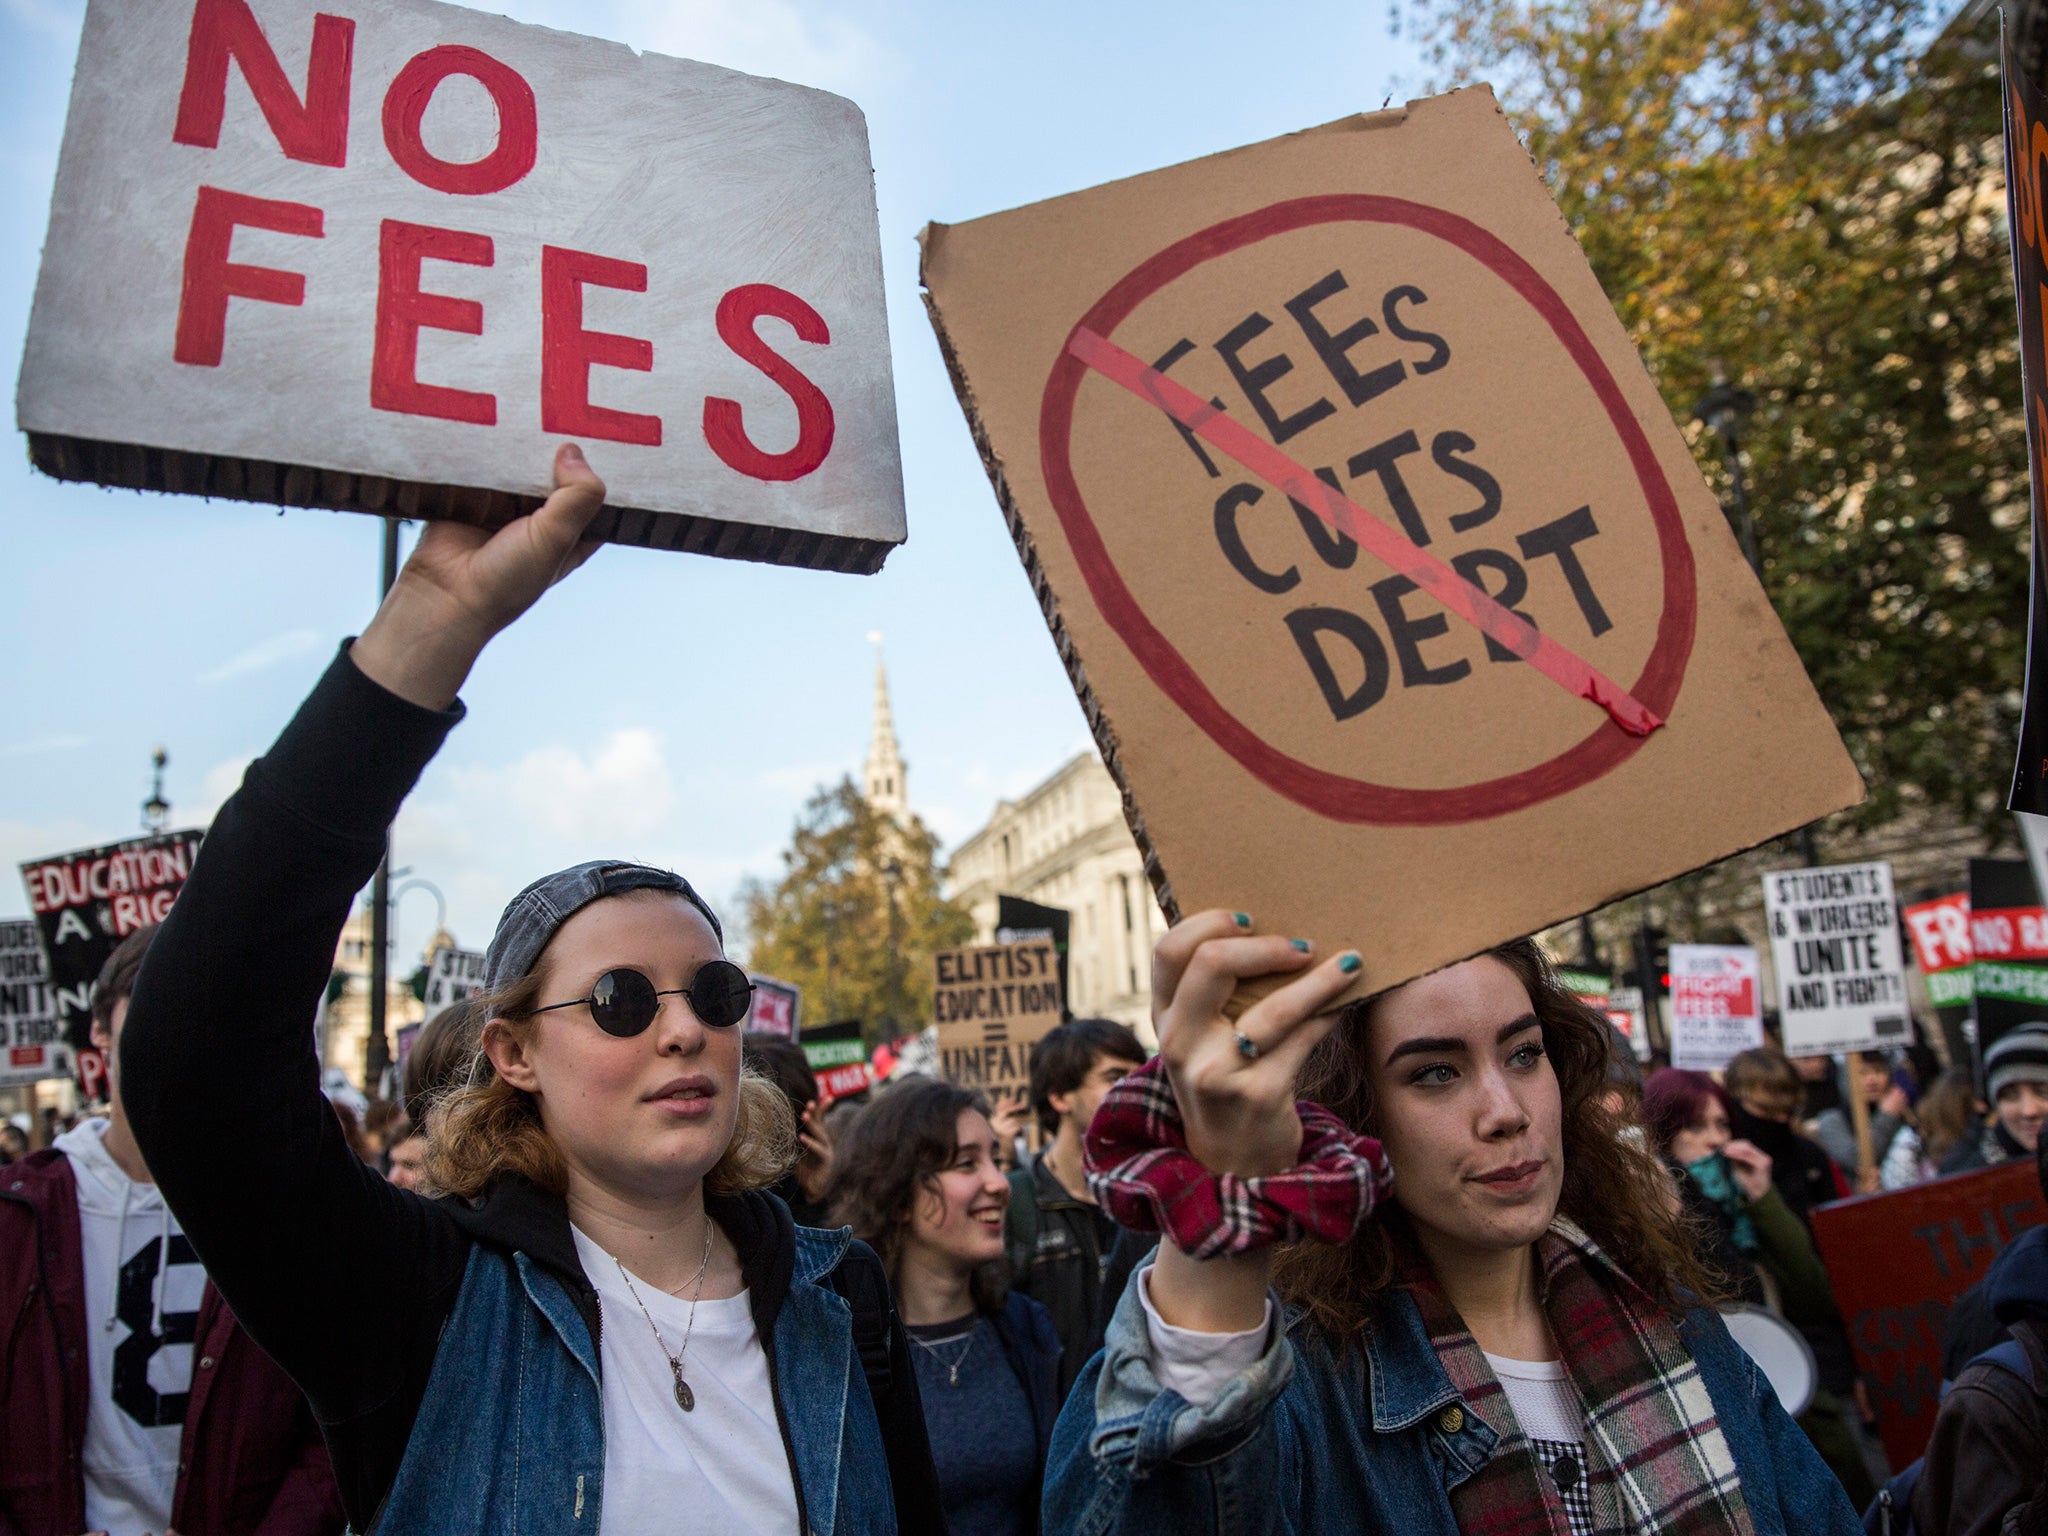 Protestors walk down The Strand during a march against student university fees on November 19, 2014 in London, England